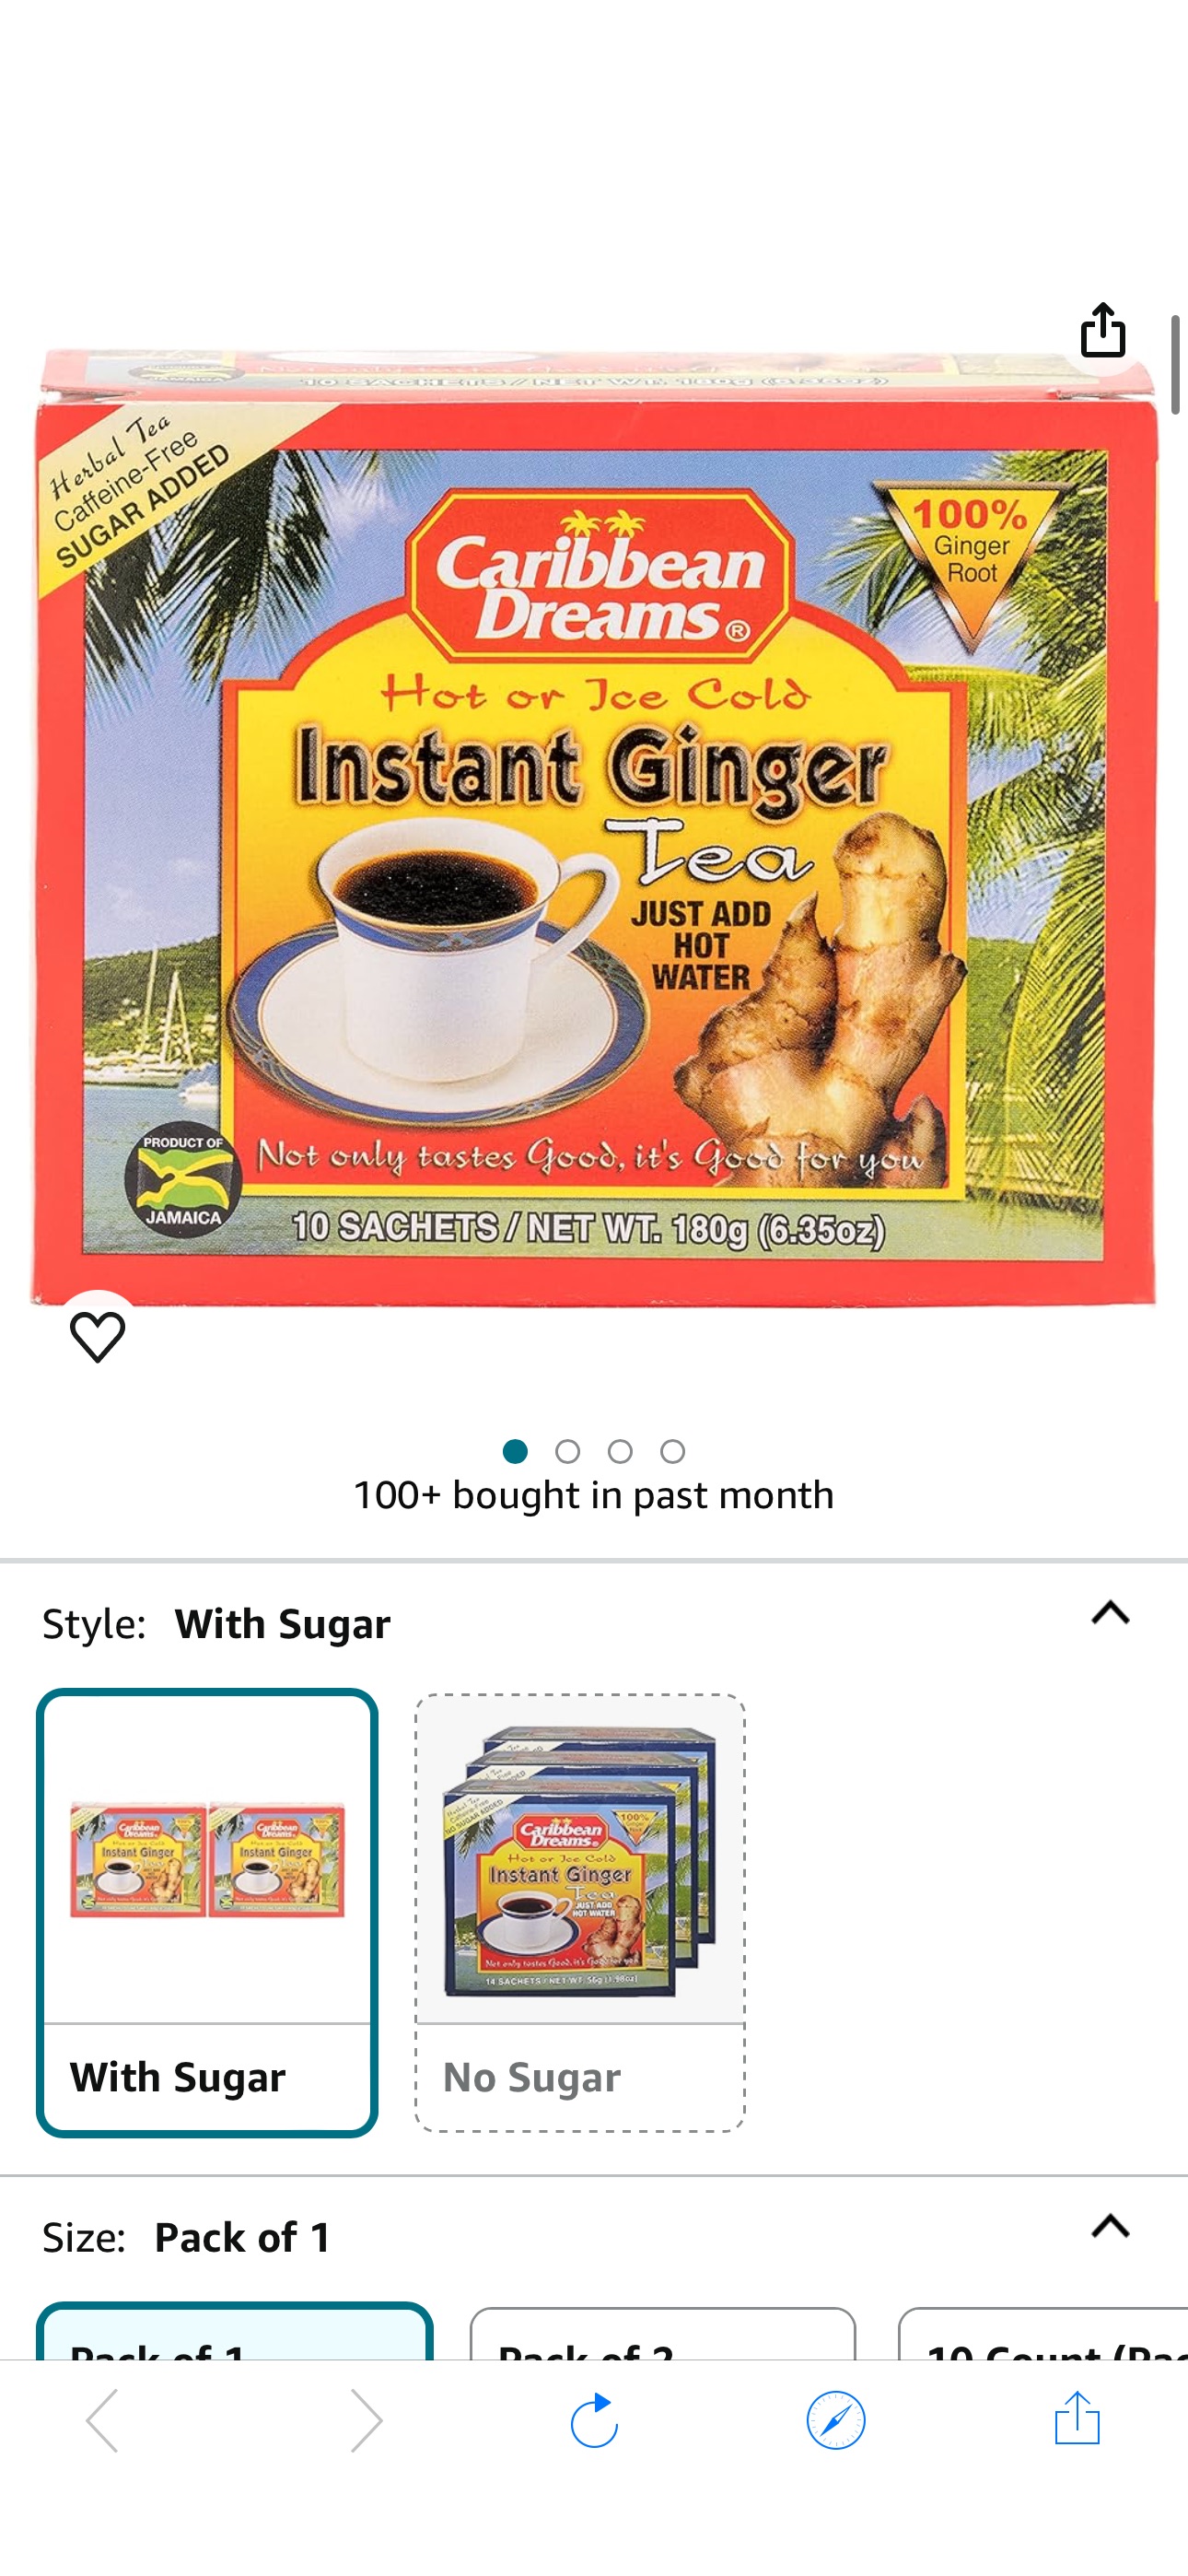 Amazon.com : Caribbean Dreams Instant Ginger Tea, 100% Natural from Jamaica, Strong Taste and Aroma, 10 Sachets : Grocery Tea Sampler : Everything Else